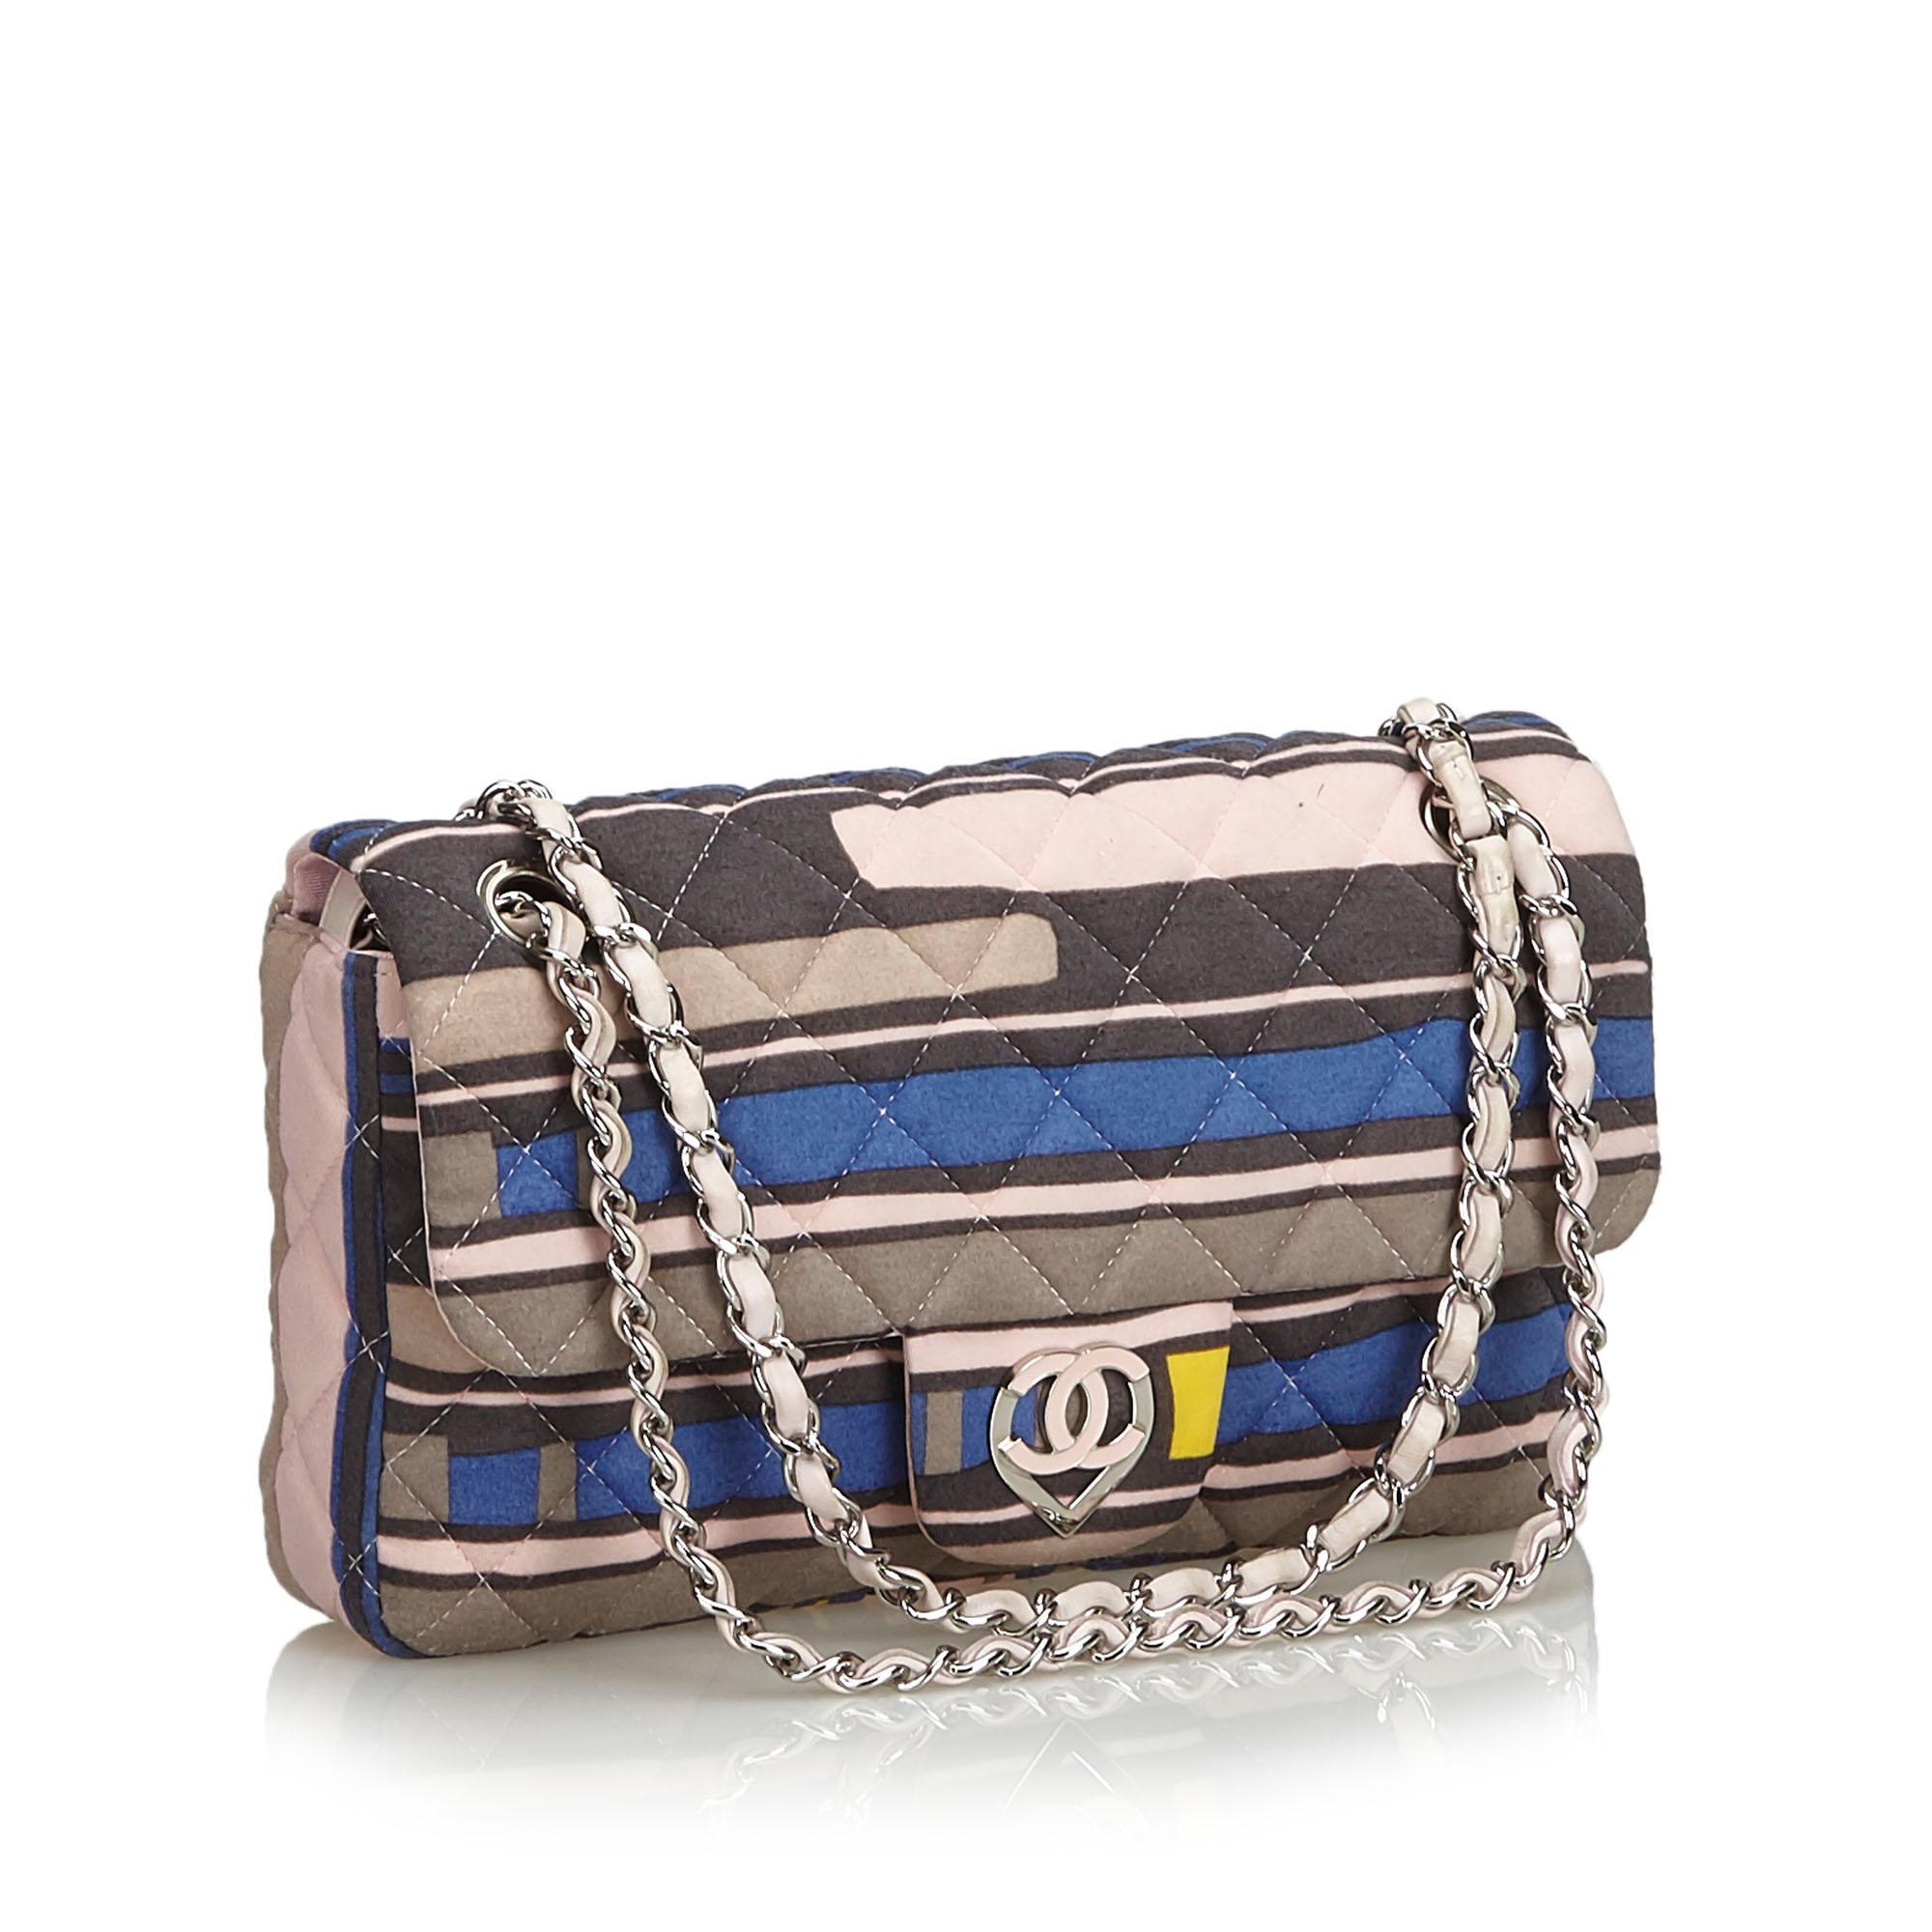 Chanel Cruise heart-shaped CC clasp fabric flap bag 

- printed cotton body
- back exterior slip pocket
- leather woven chain handles
- top flap with magnetic closure
- interior zip and slip pockets

Item authenticated by HEWI London. 

Please